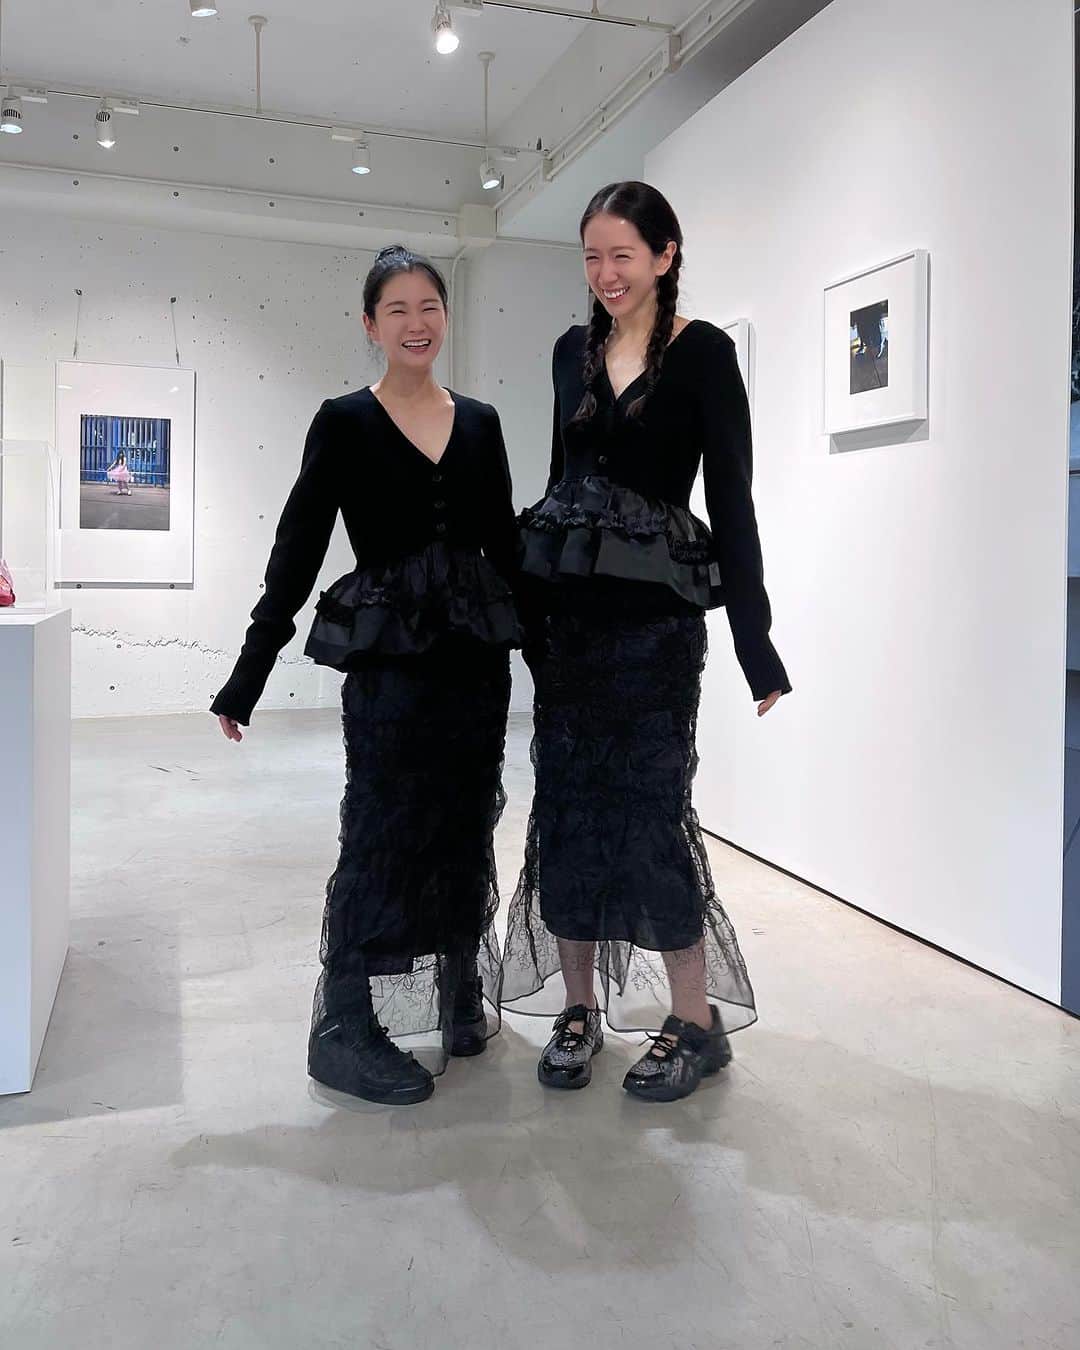 鈴木淳子さんのインスタグラム写真 - (鈴木淳子Instagram)「👯‍♀️🖤 @ceciliebahnsen @asics_sportstyle_jp pop up🖤 I'm happy to have met Belinda and took photos together！ たくさん試着して、このカーディガンを選びました。  ドレスやスカートに目が行きがちだけど、寒い国デンマークのニットだけあって、本当に可愛くて暖かいんです。 そして絶妙にシルエットが良い。 高級だけど、その価値を感じるカシミヤやモヘアのものは、特に鈴木のおすすめアイテムです。  スニーカーについて、いくつか質問頂いてたのですが、11月22日発売みたいです💞私は普段23.5cmなんですが、靴下と履きたかったので、24cmを選びました。ぴったりからやや緩めくらいでした。ご参考までに🙋🏻‍♀️  Belinda, whom I've been wanting to meet, turned out to be a charming person at the party! After trying on many items, I ordered a cardigan. While dresses and skirts often steal the spotlight, Danish knits are truly cute and warm, with an exquisite silhouette. Though a bit luxurious, Junko highly recommends the value you feel in cashmere and mohair pieces. Regarding sneakers, I received some questions; I usually wear 23.5cm, but I wanted to wear them with socks, so I chose the 24cm size. They fit just right, with a slight looseness. Just for your reference! 🙋🏻‍♀️  #ceciliebahnsen」11月10日 21時25分 - junkosuzuki